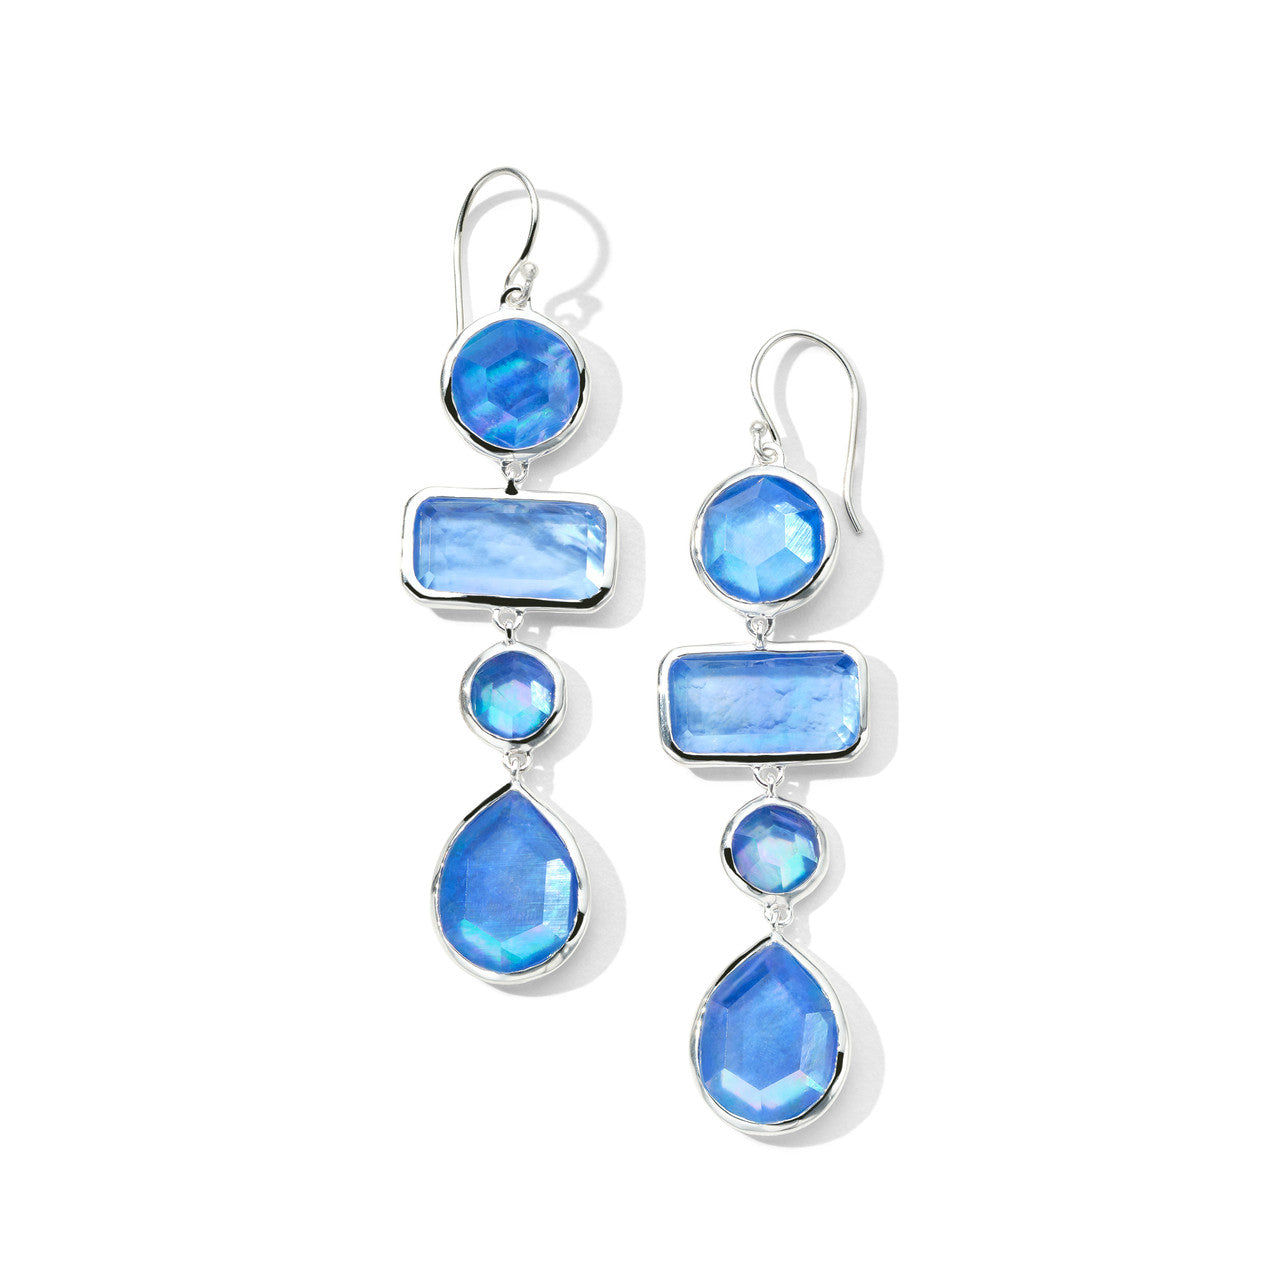 IPPOLITA Rock Candy Large Mixed-Cut Four Tier Earrings in Sterling Silver